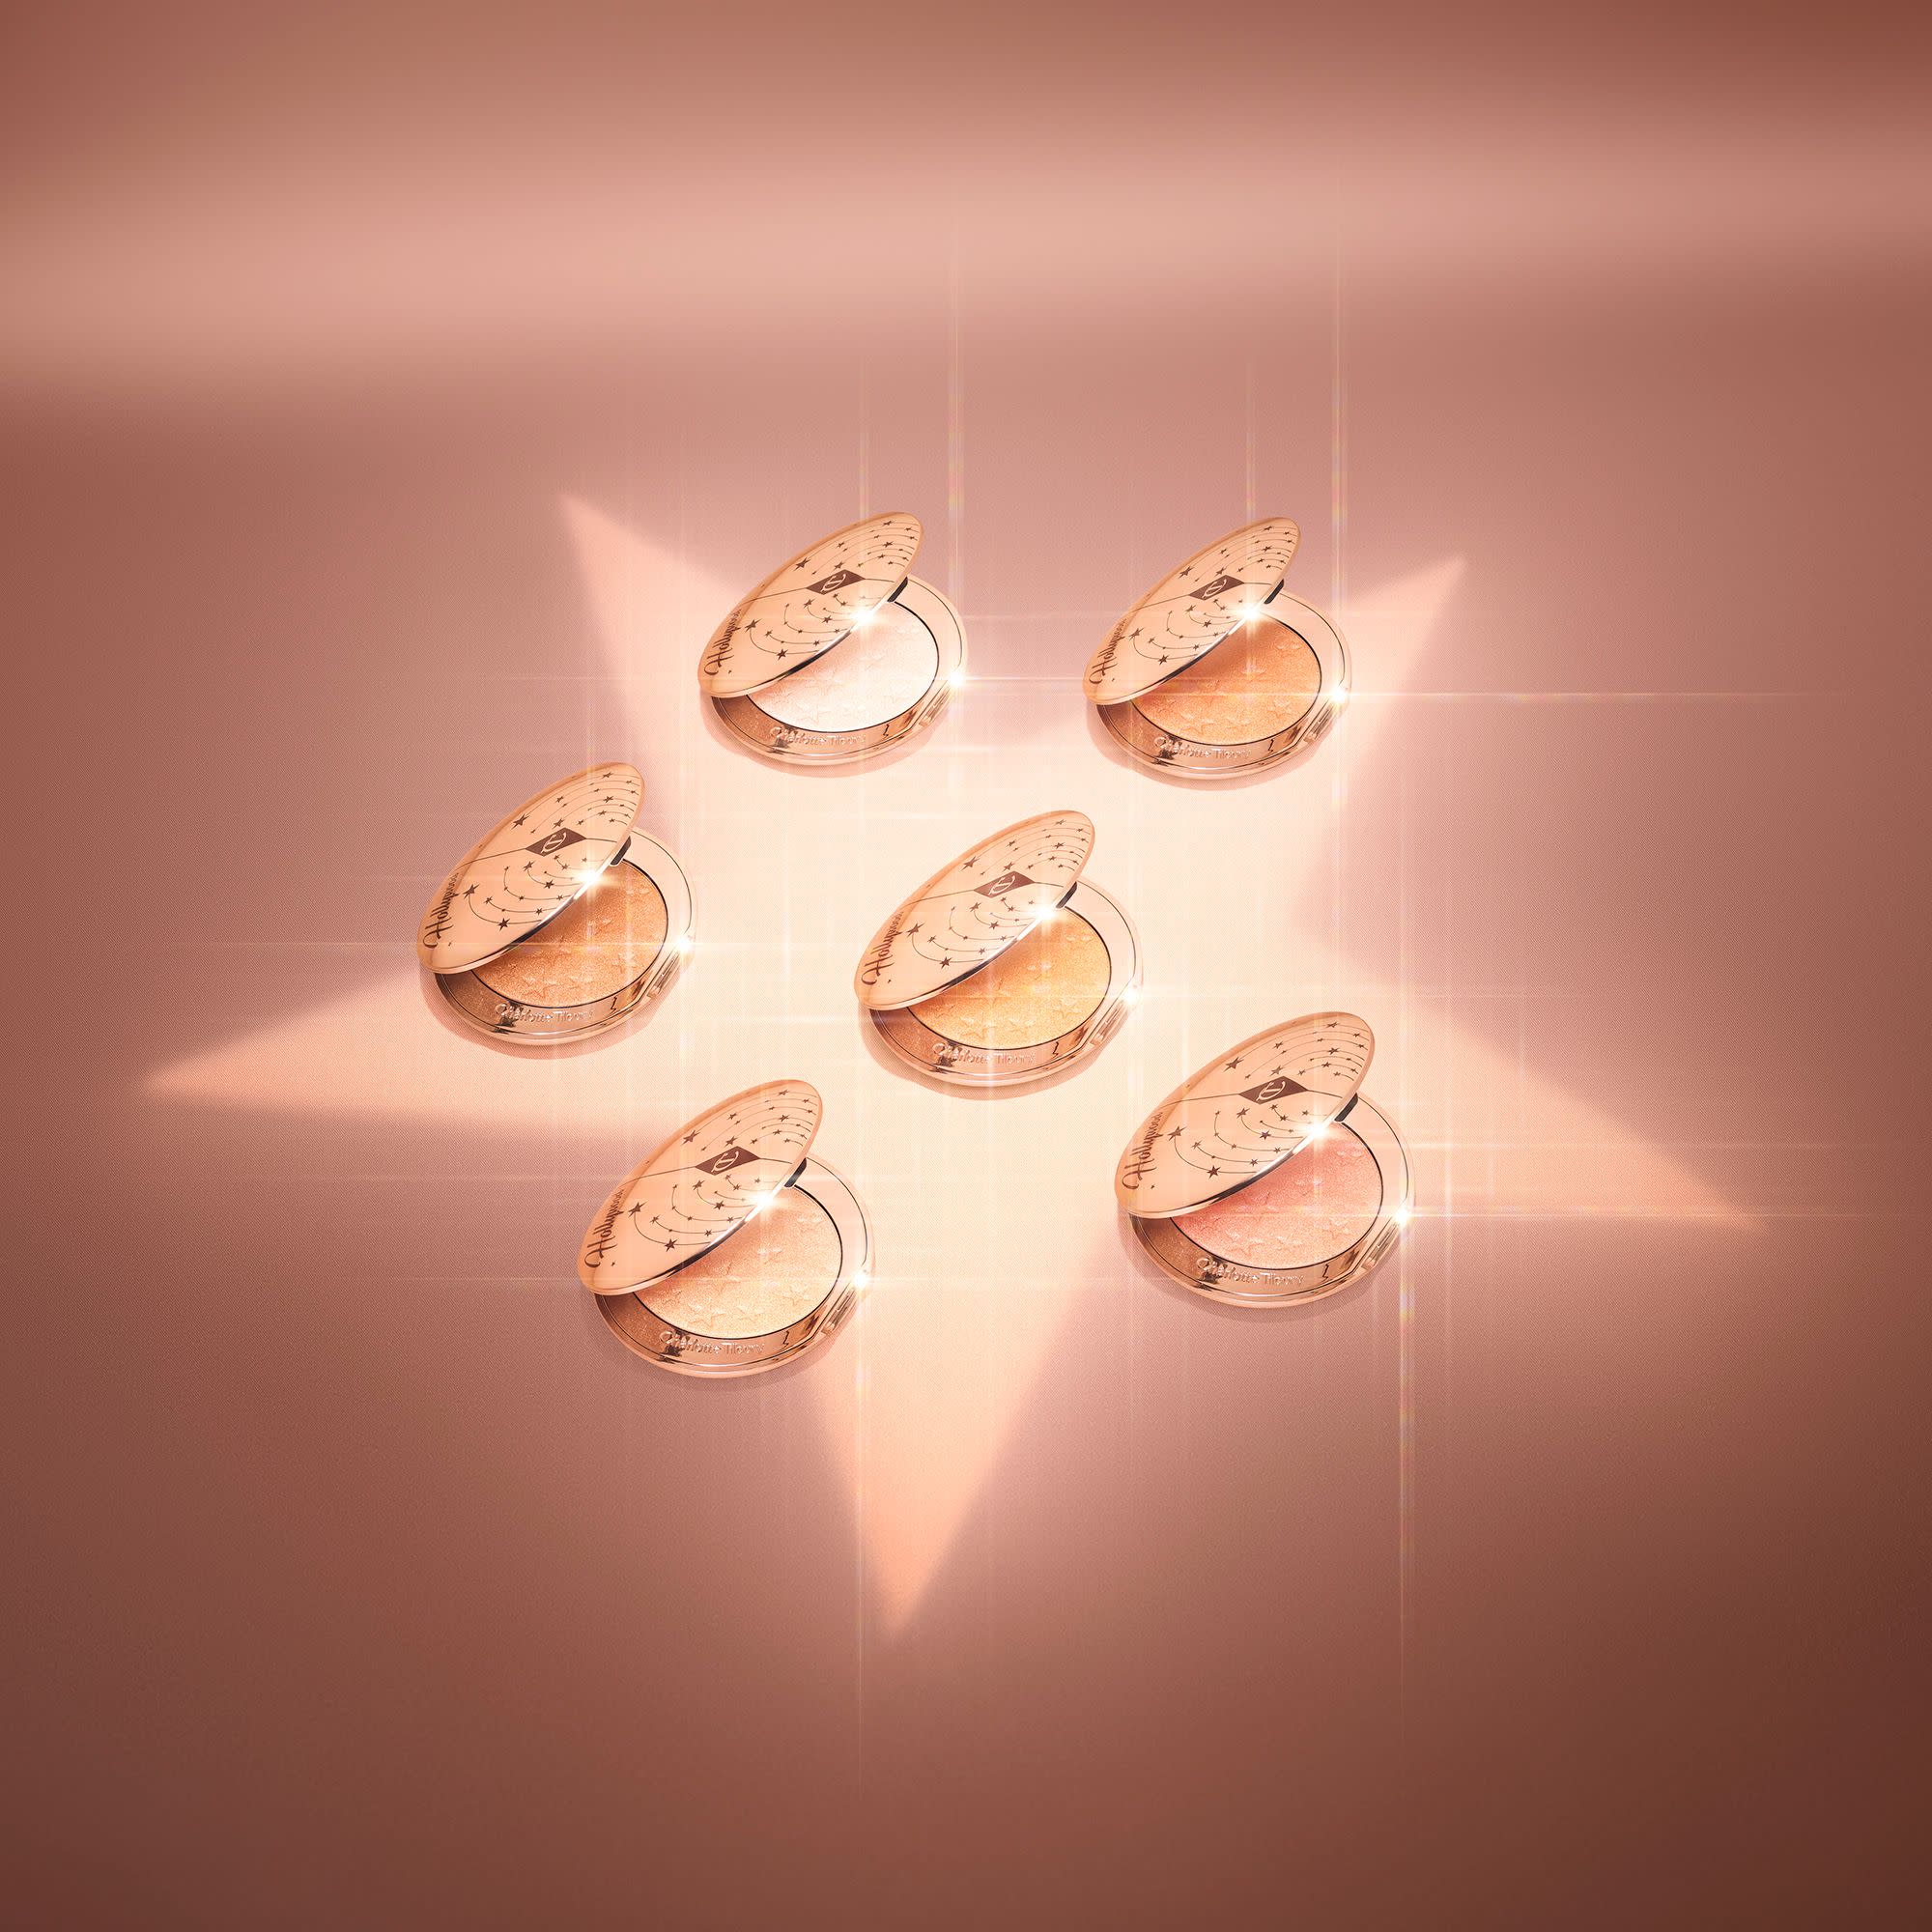 A collection of open, powder highlighter compacts in shades of gold, brown, pink, and silver in sleek, golden-coloured lids.